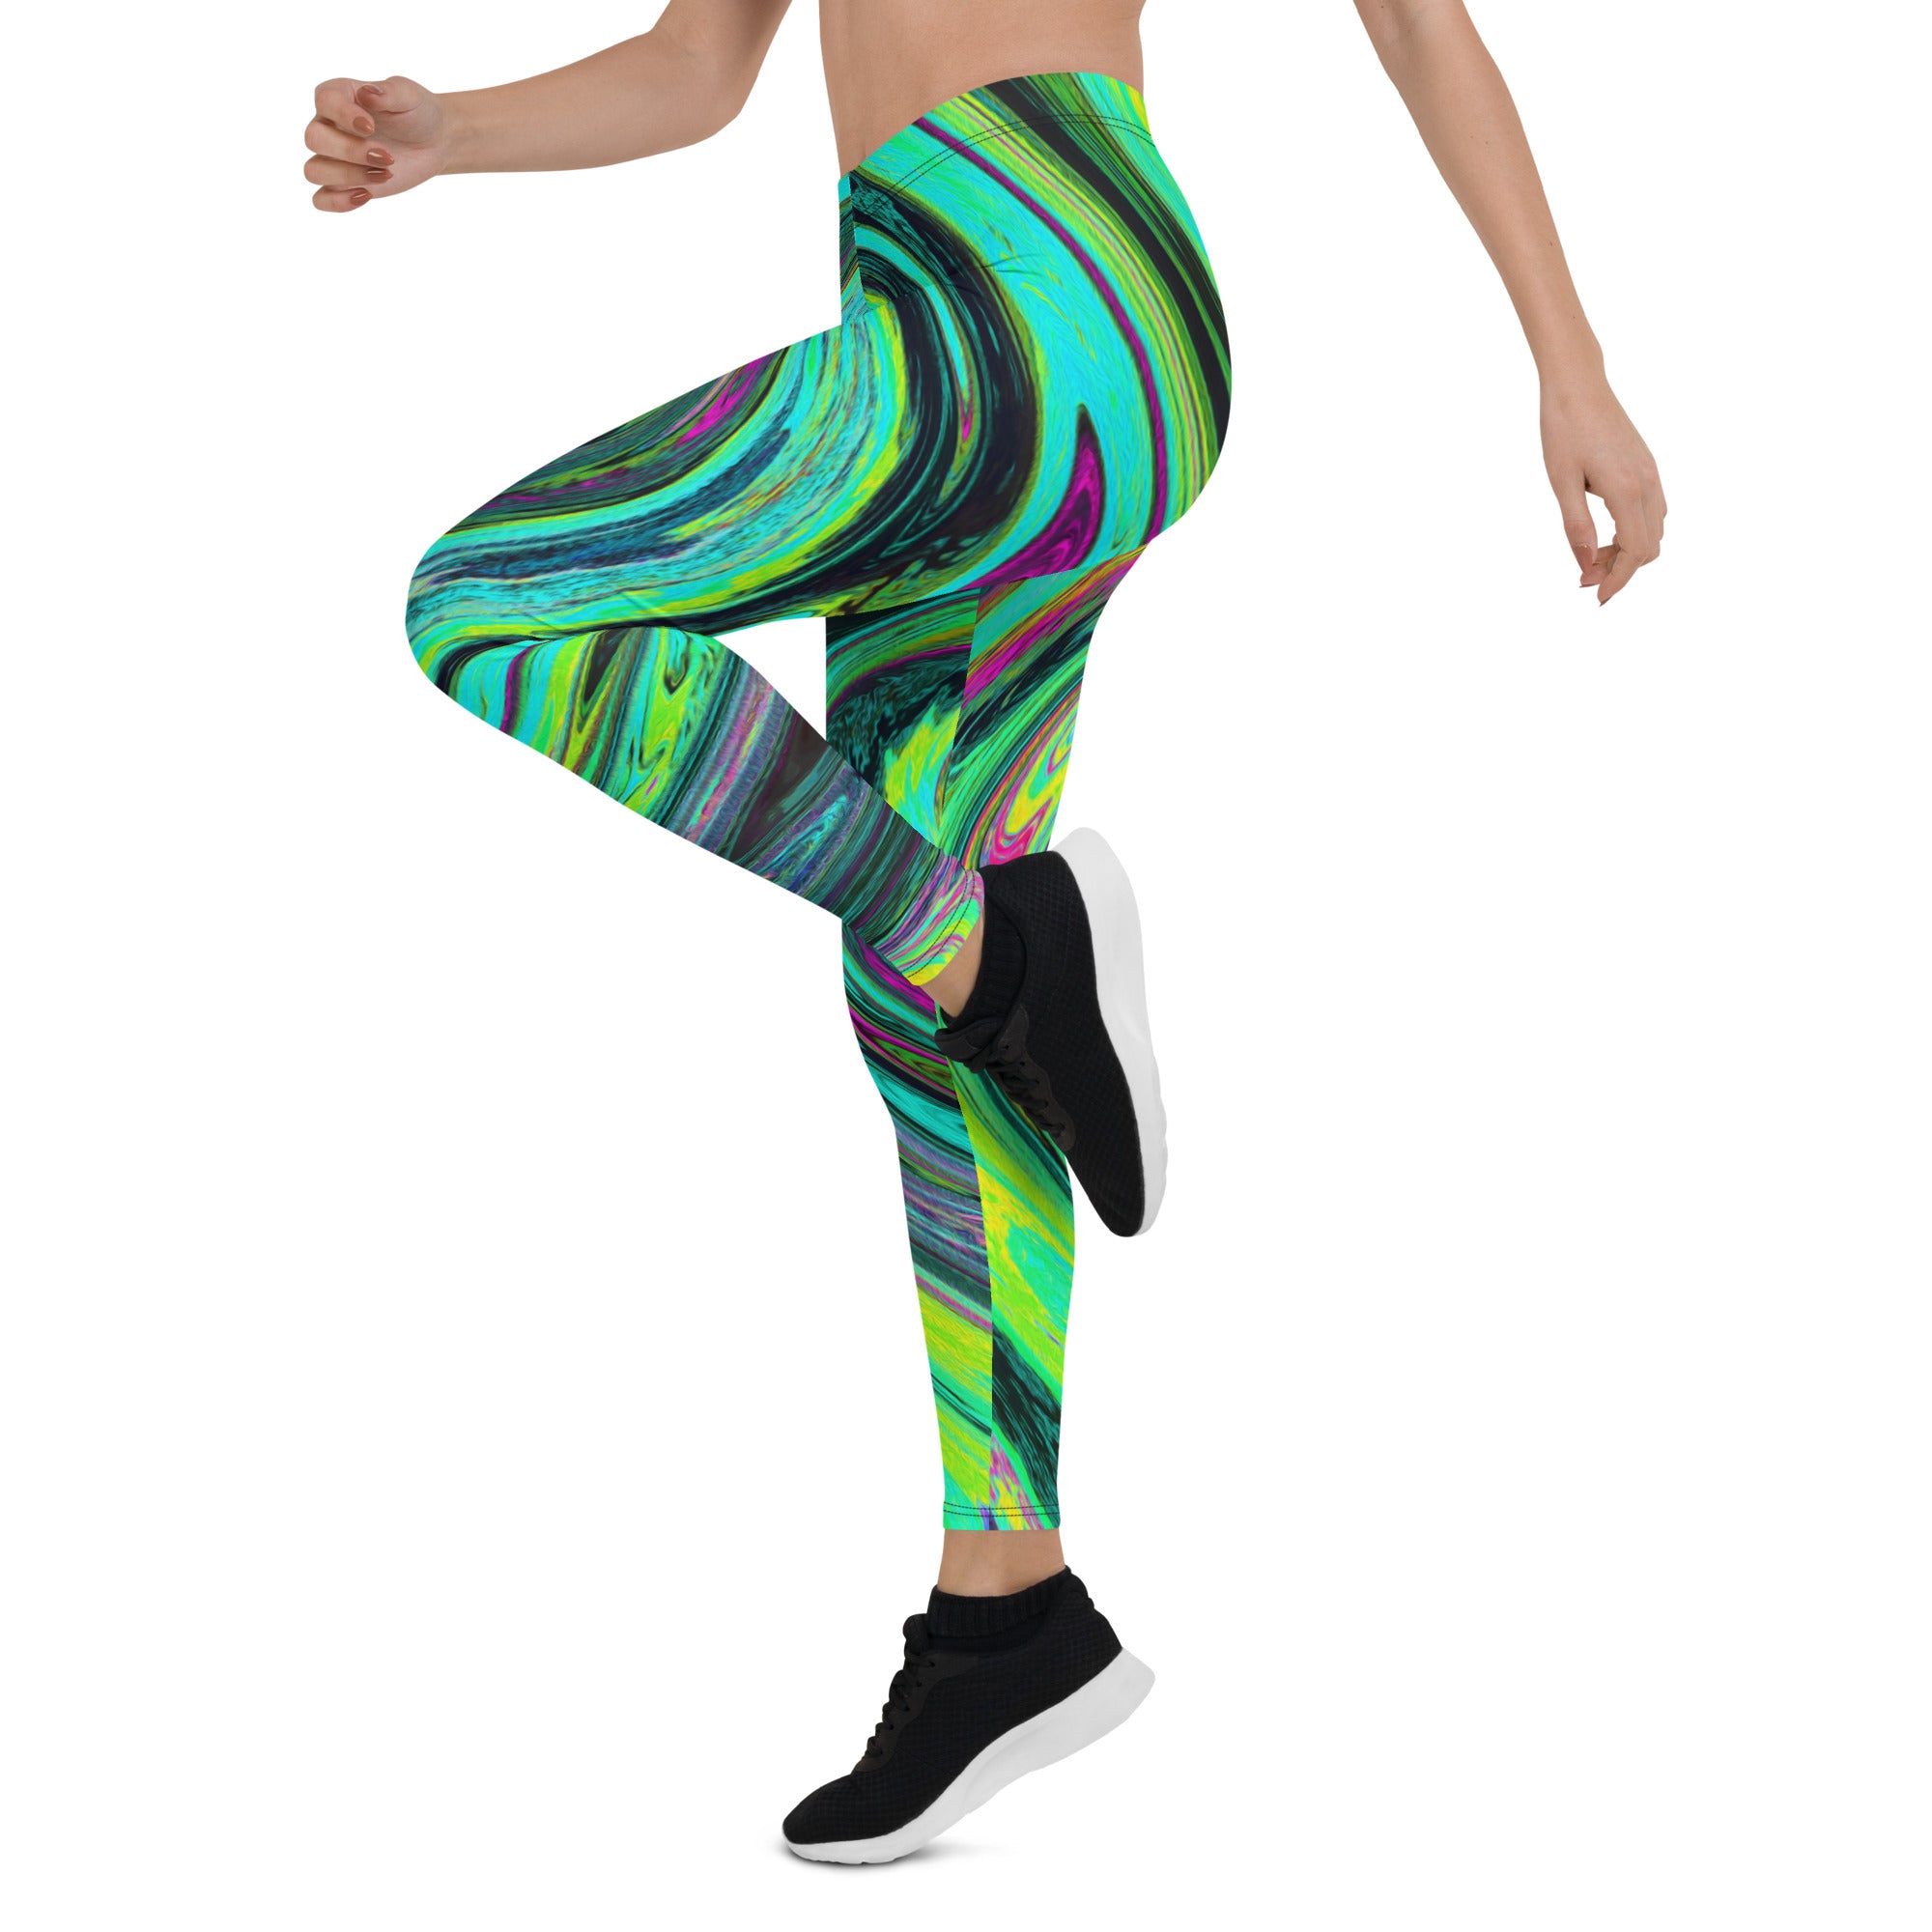 Leggings for Women - Groovy Abstract Retro Green and Magenta Swirl